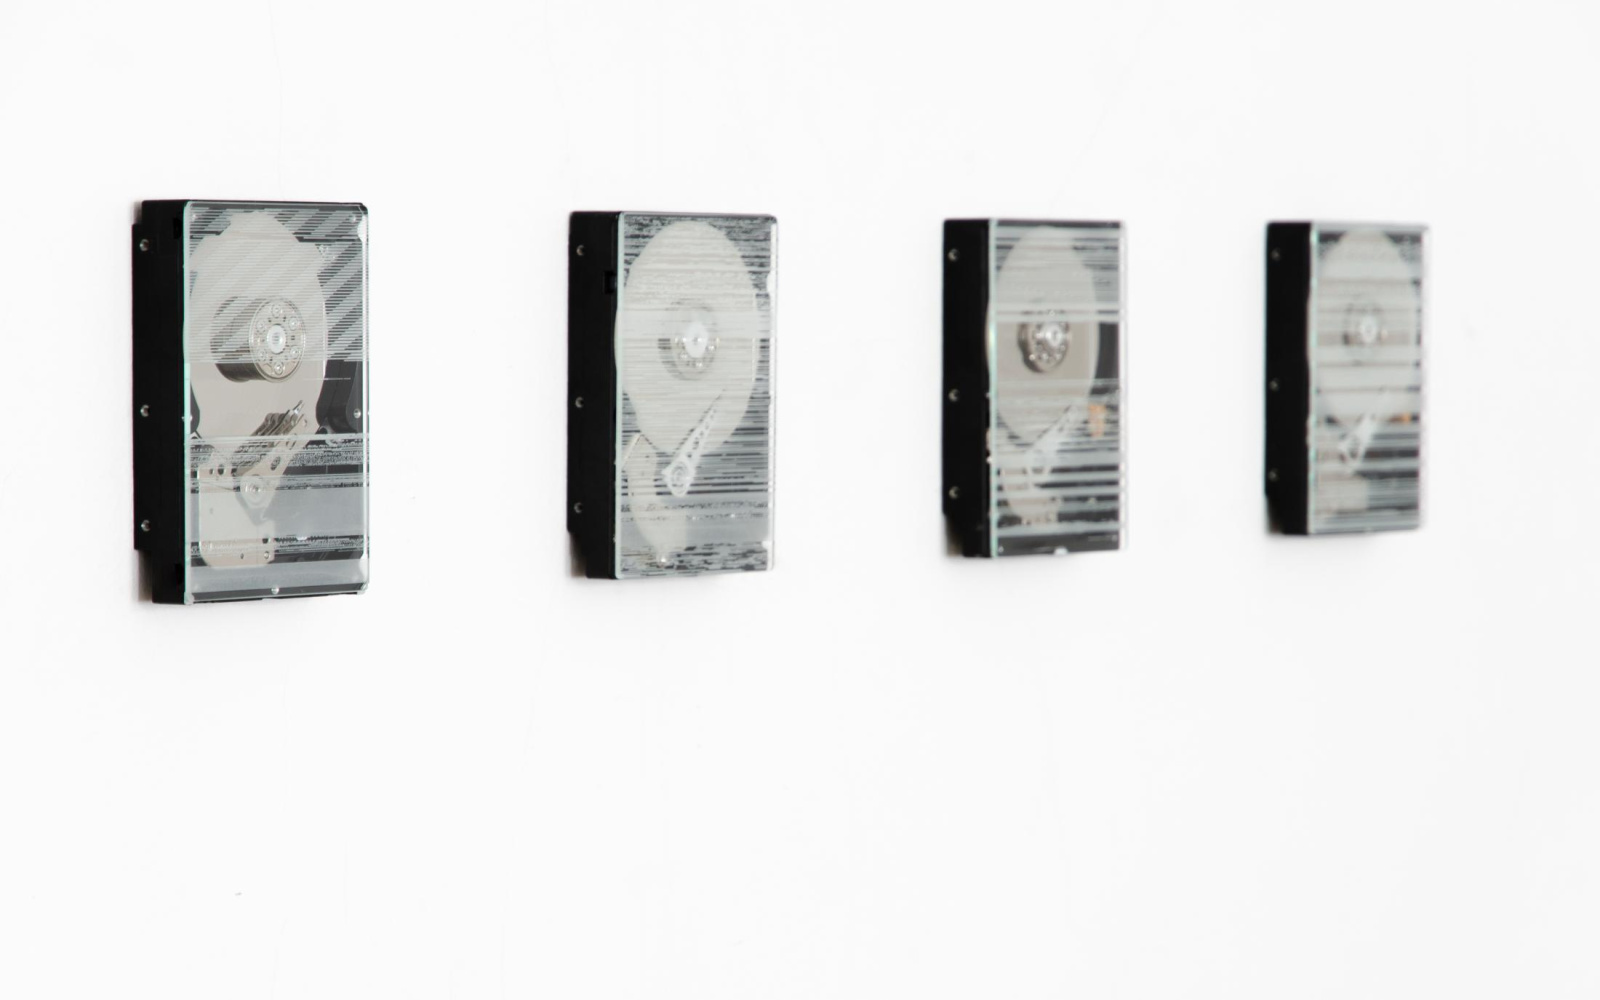 Four hard drives hang in a row on the wall. They are covered with a glass with engravings